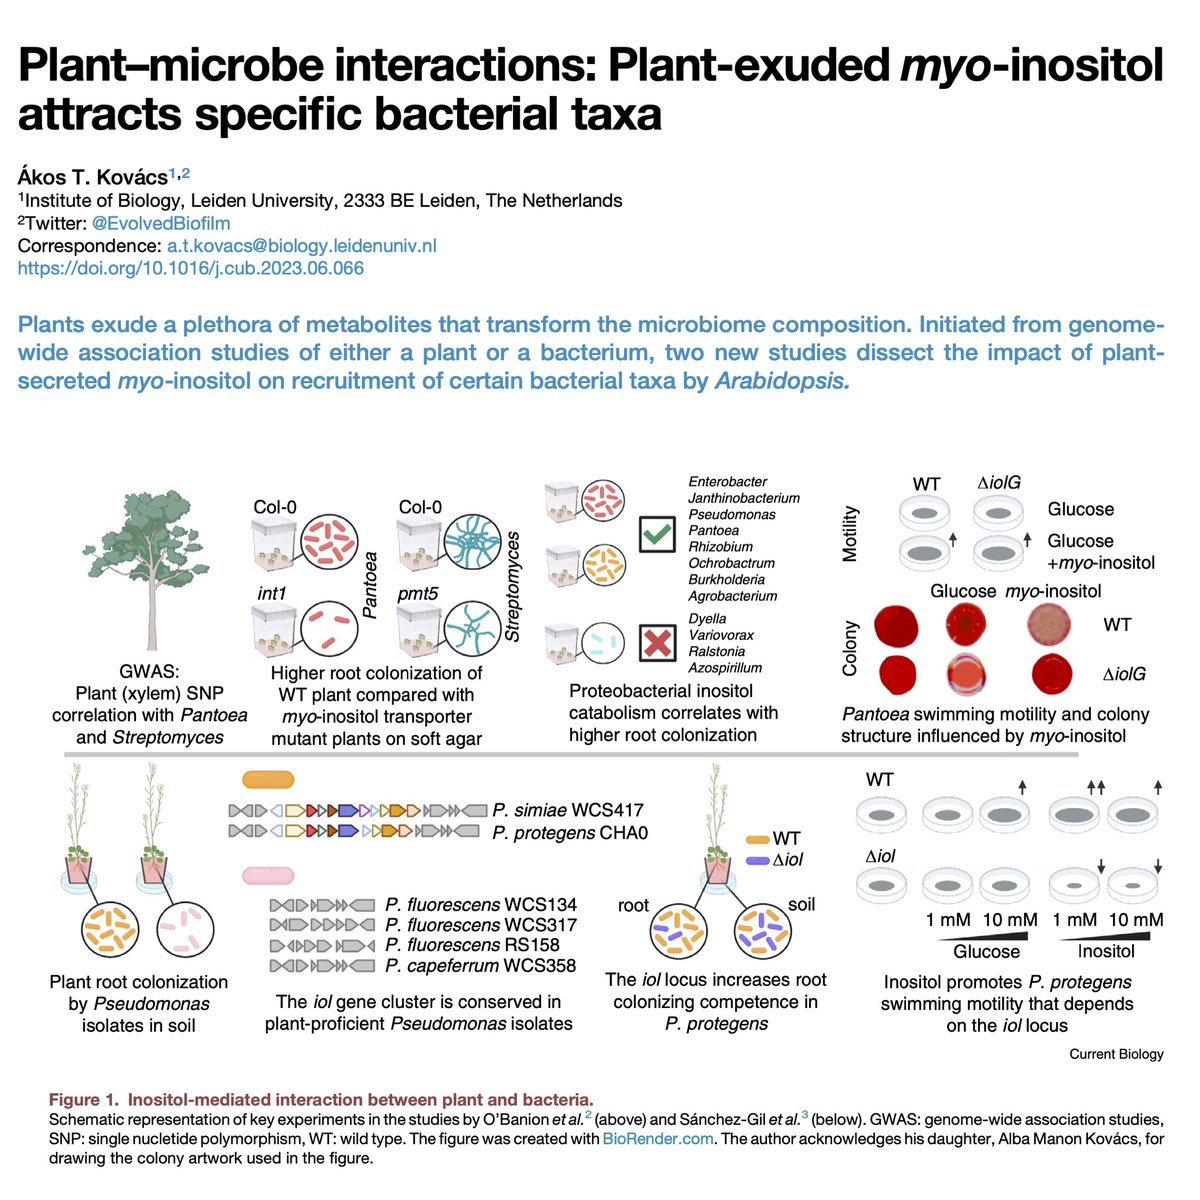 Current issue of @CurrentBiology includes the back-to-back papers by @beeobanion / @Slebiomes and @JJSanchezGil / @dejongepmi on plant attracted bacterial taxa and (myo-)inositol... See my Dispatch 
authors.elsevier.com/a/1hYPf3QW8S2R…
(50 days free download)
@LeidenBiology #MicrobiomeEcology